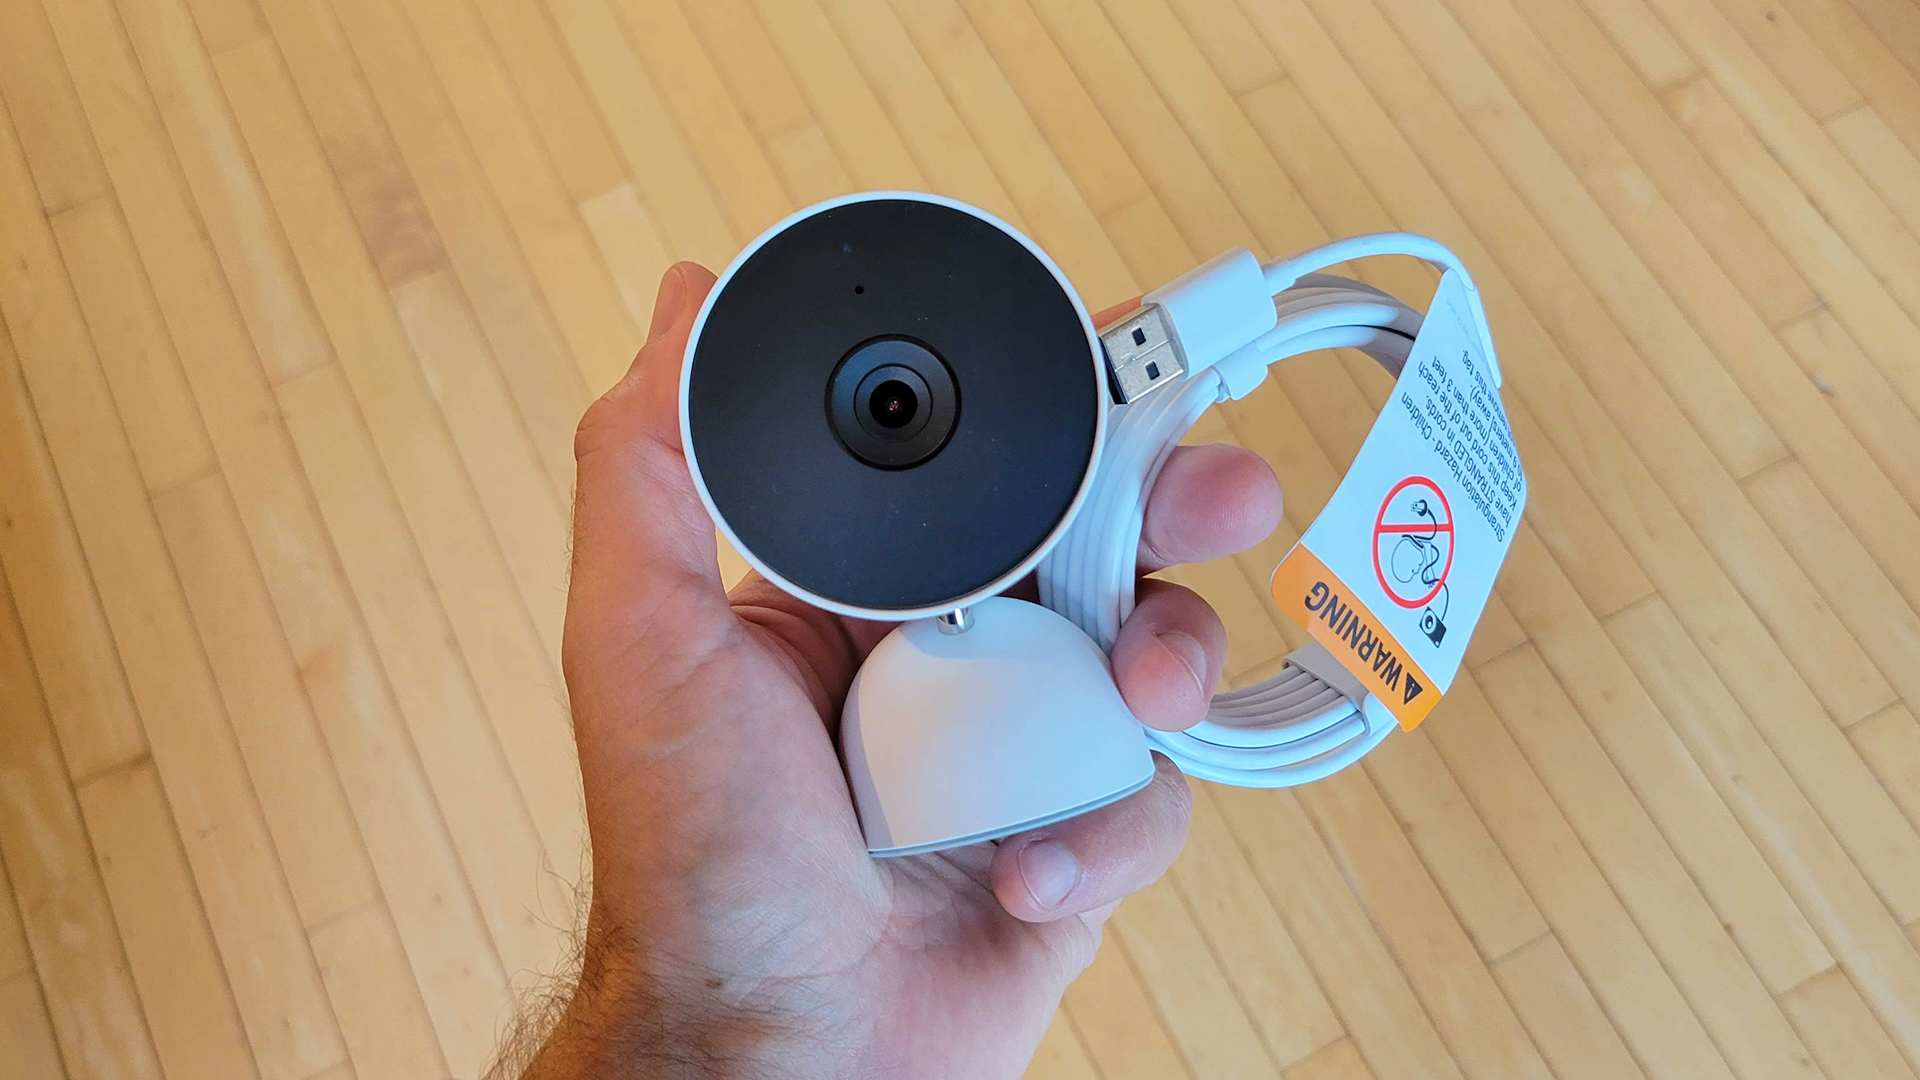 Google Nest Cam Wired Review In hand